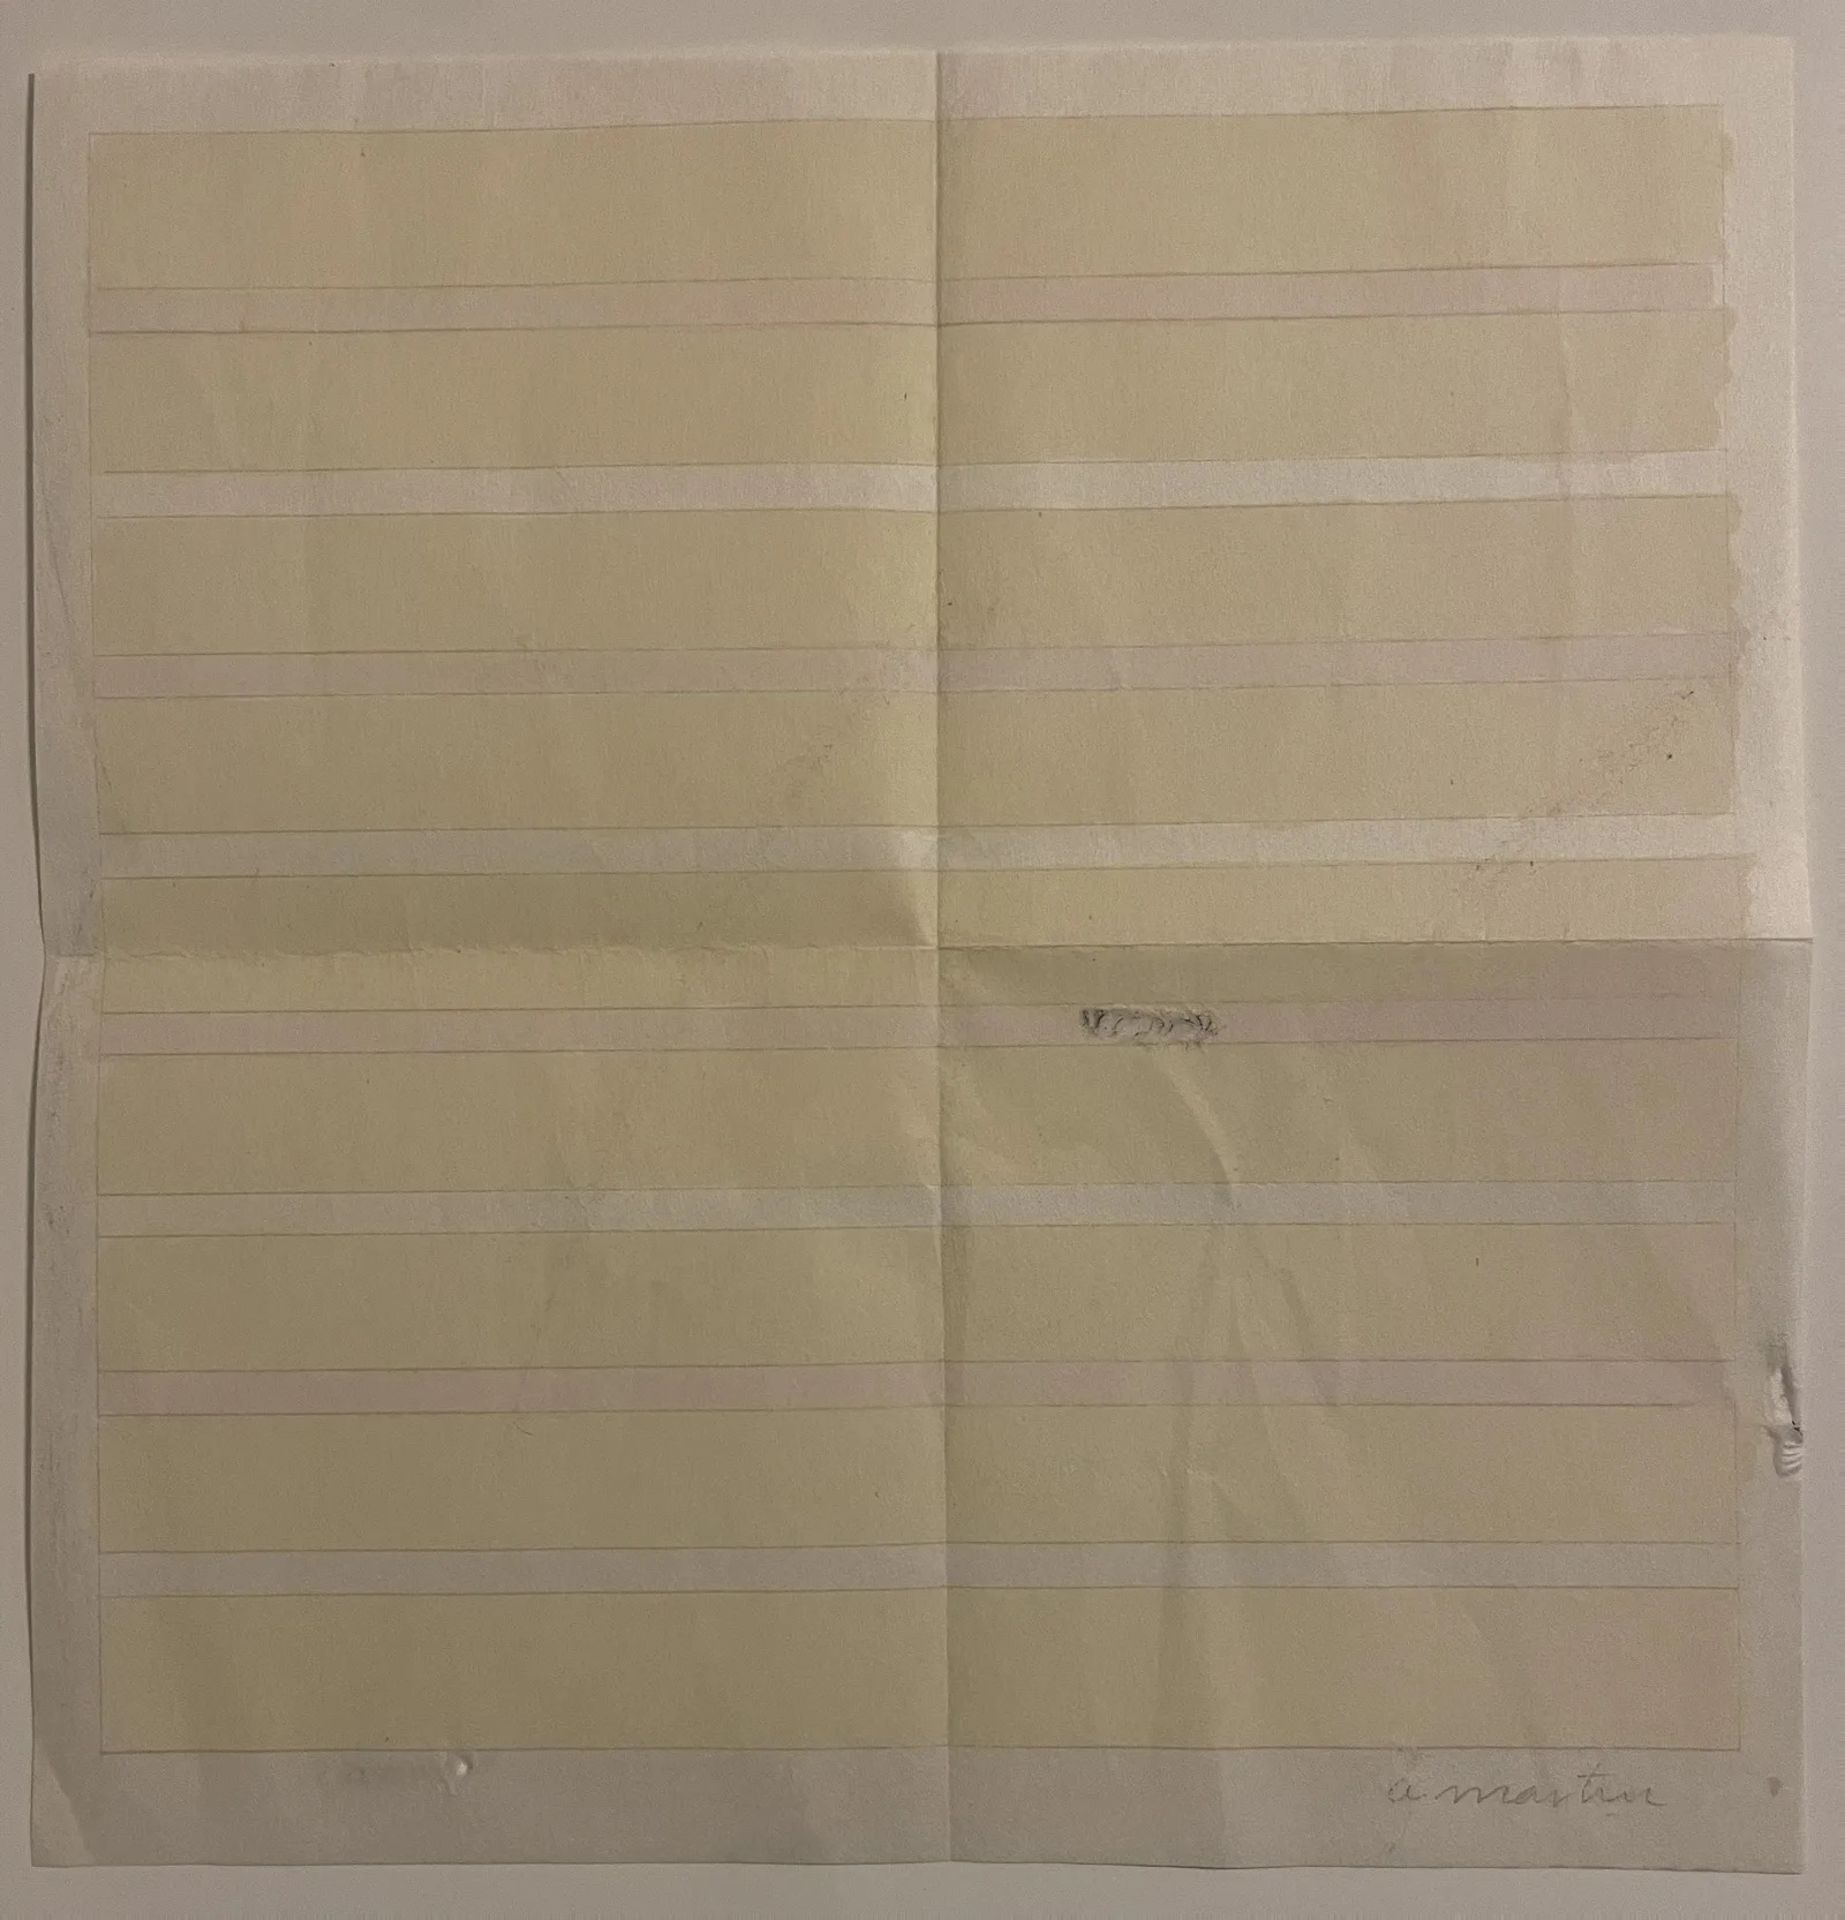 Agnes Martin Signed 1980's Print on Thin Paper